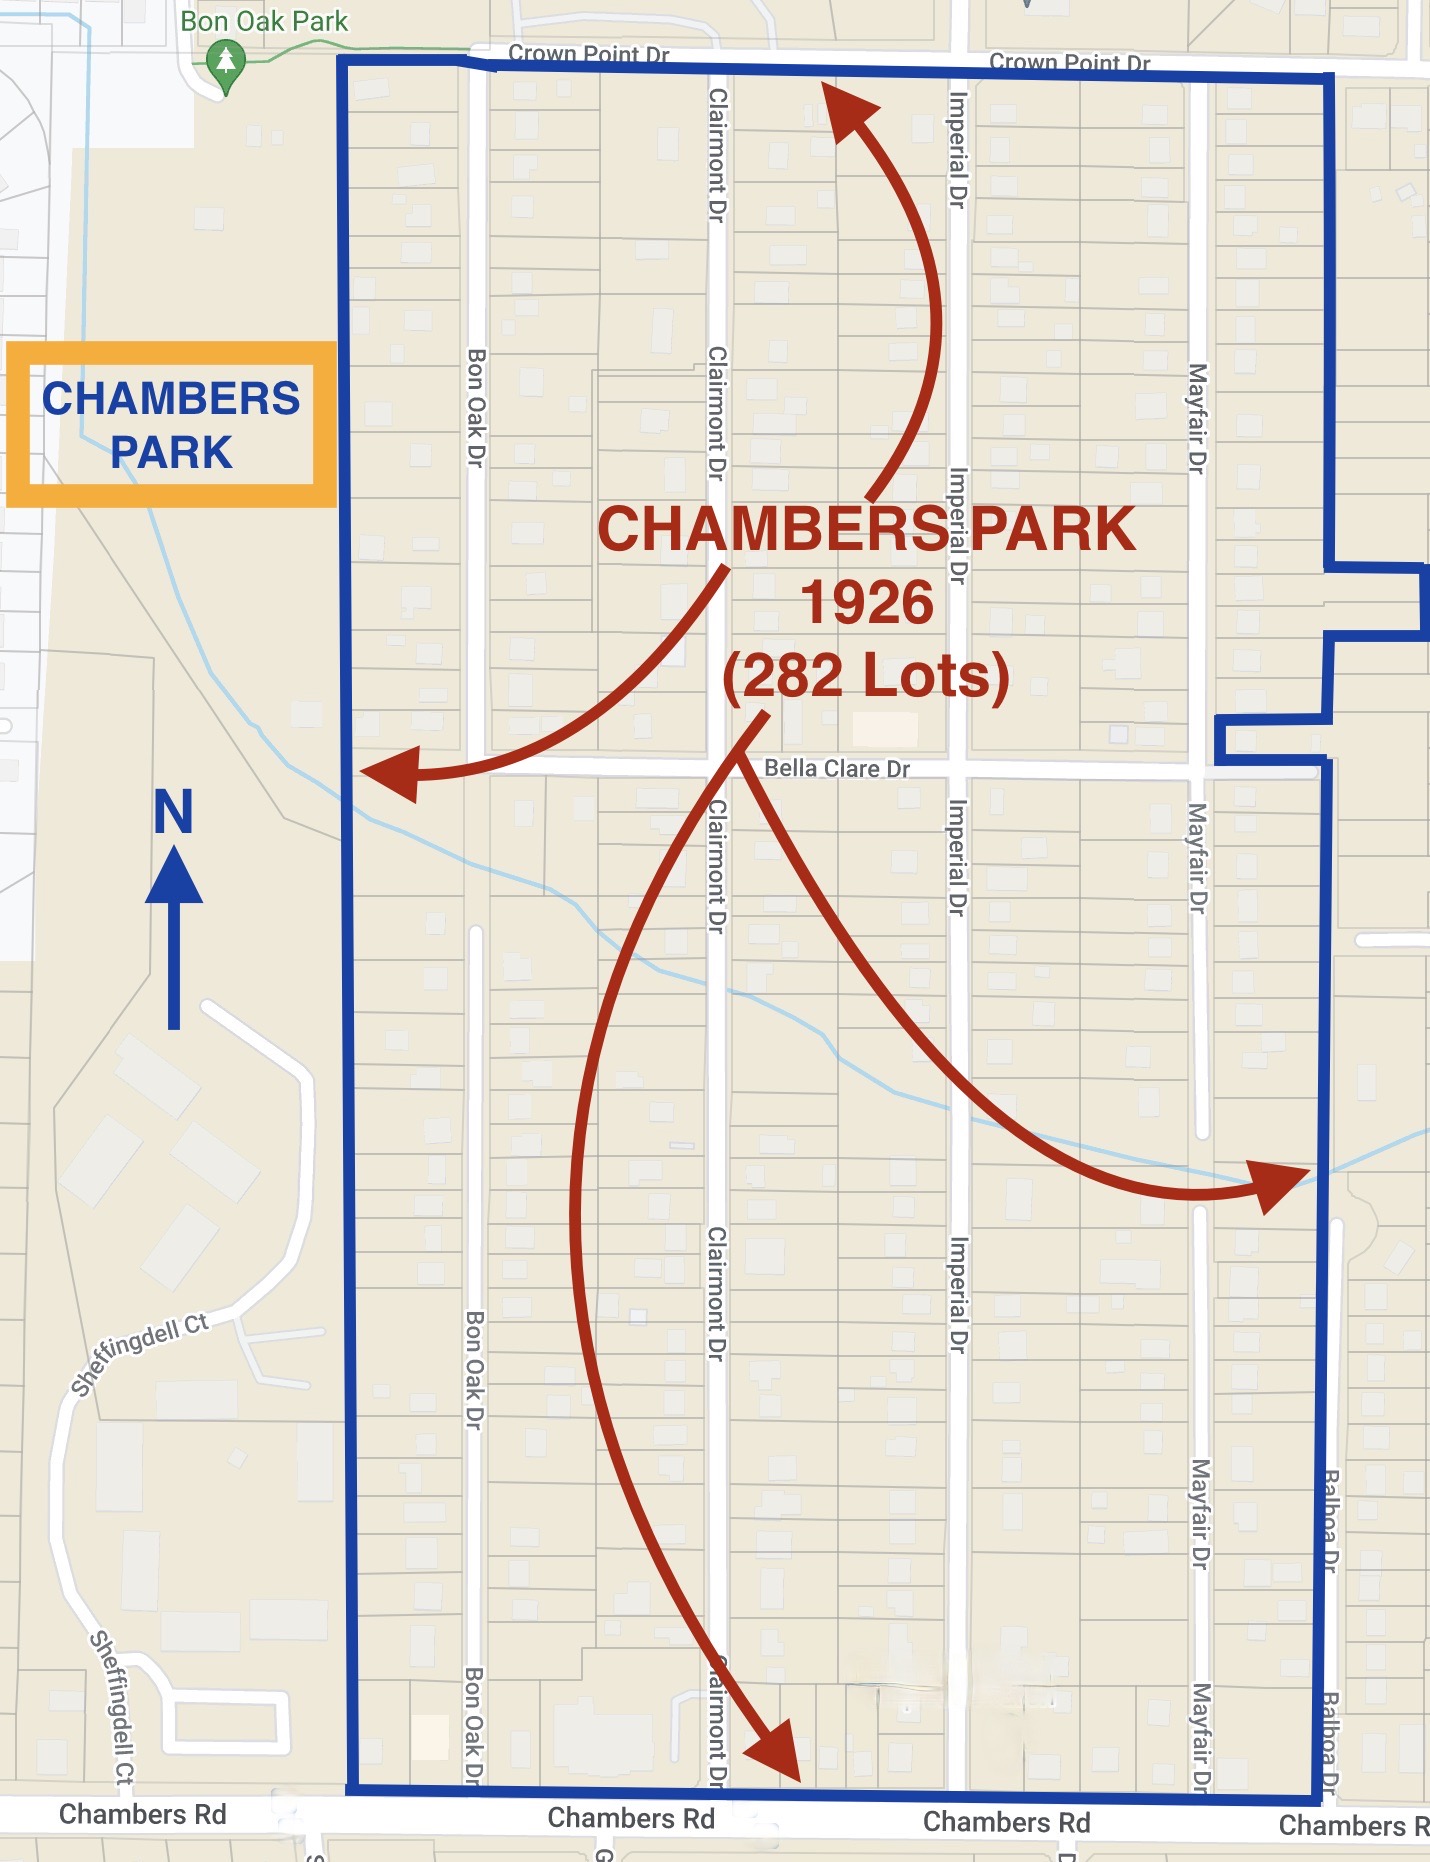 CHAMBERS PARK SUBDIVISION MAP